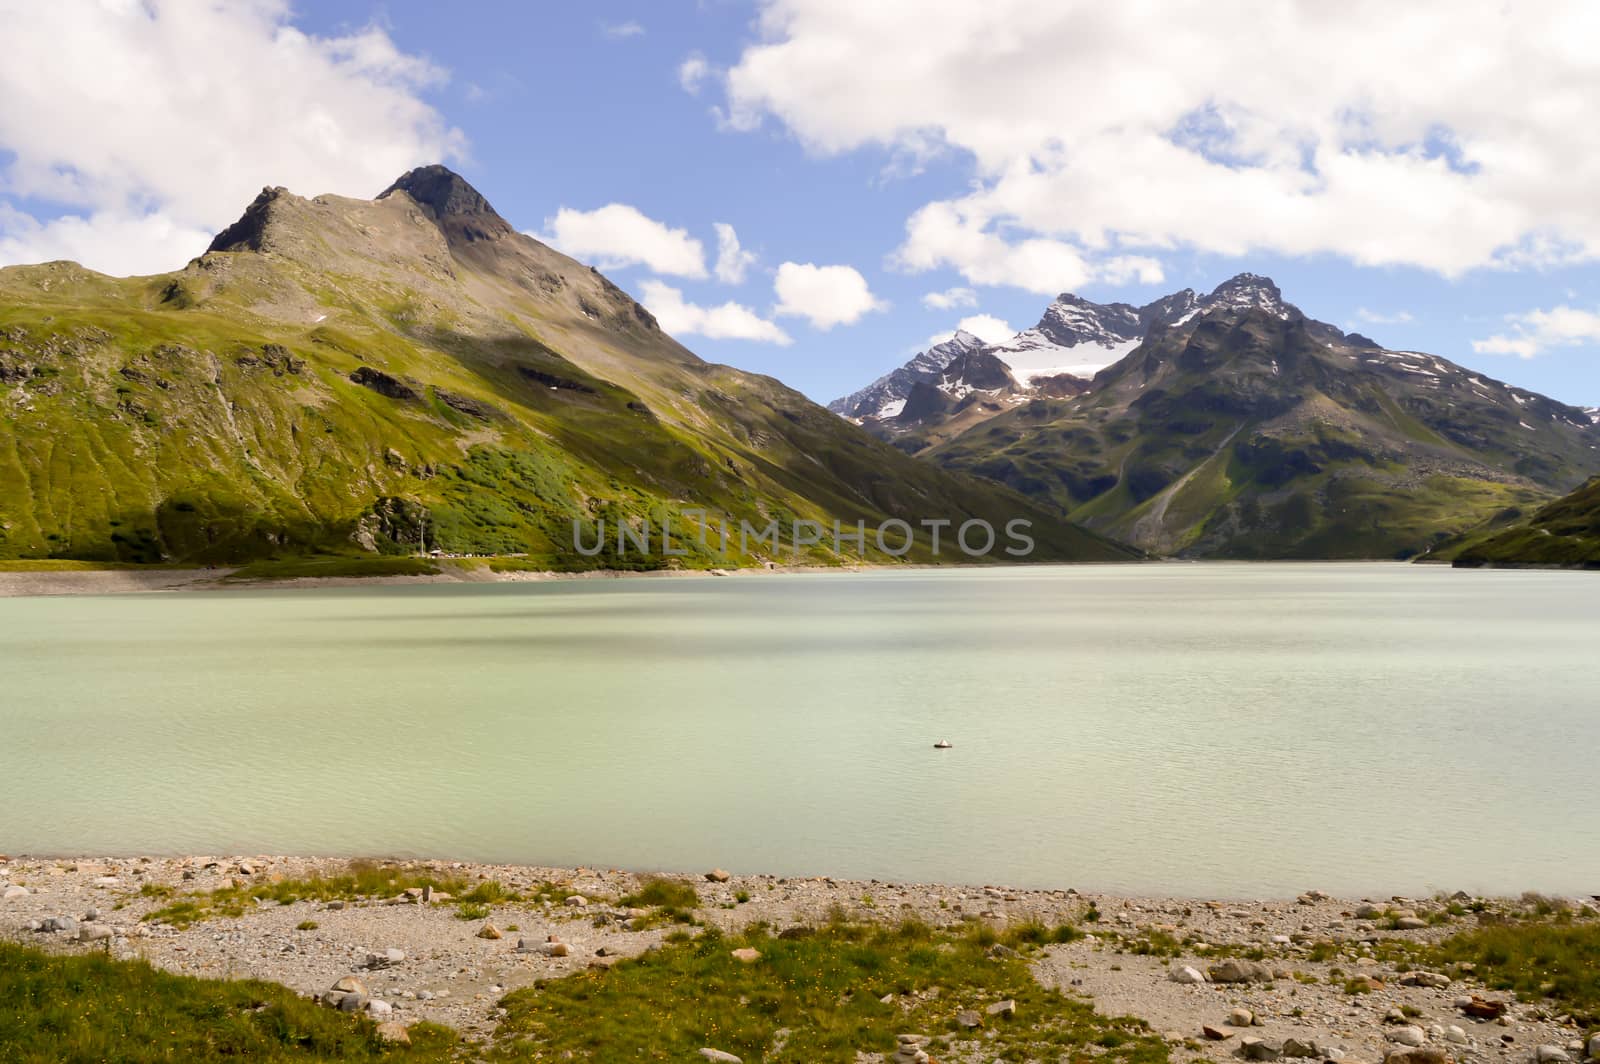 The Silvretta massif with its lake in the Central Eastern Alps in Austria